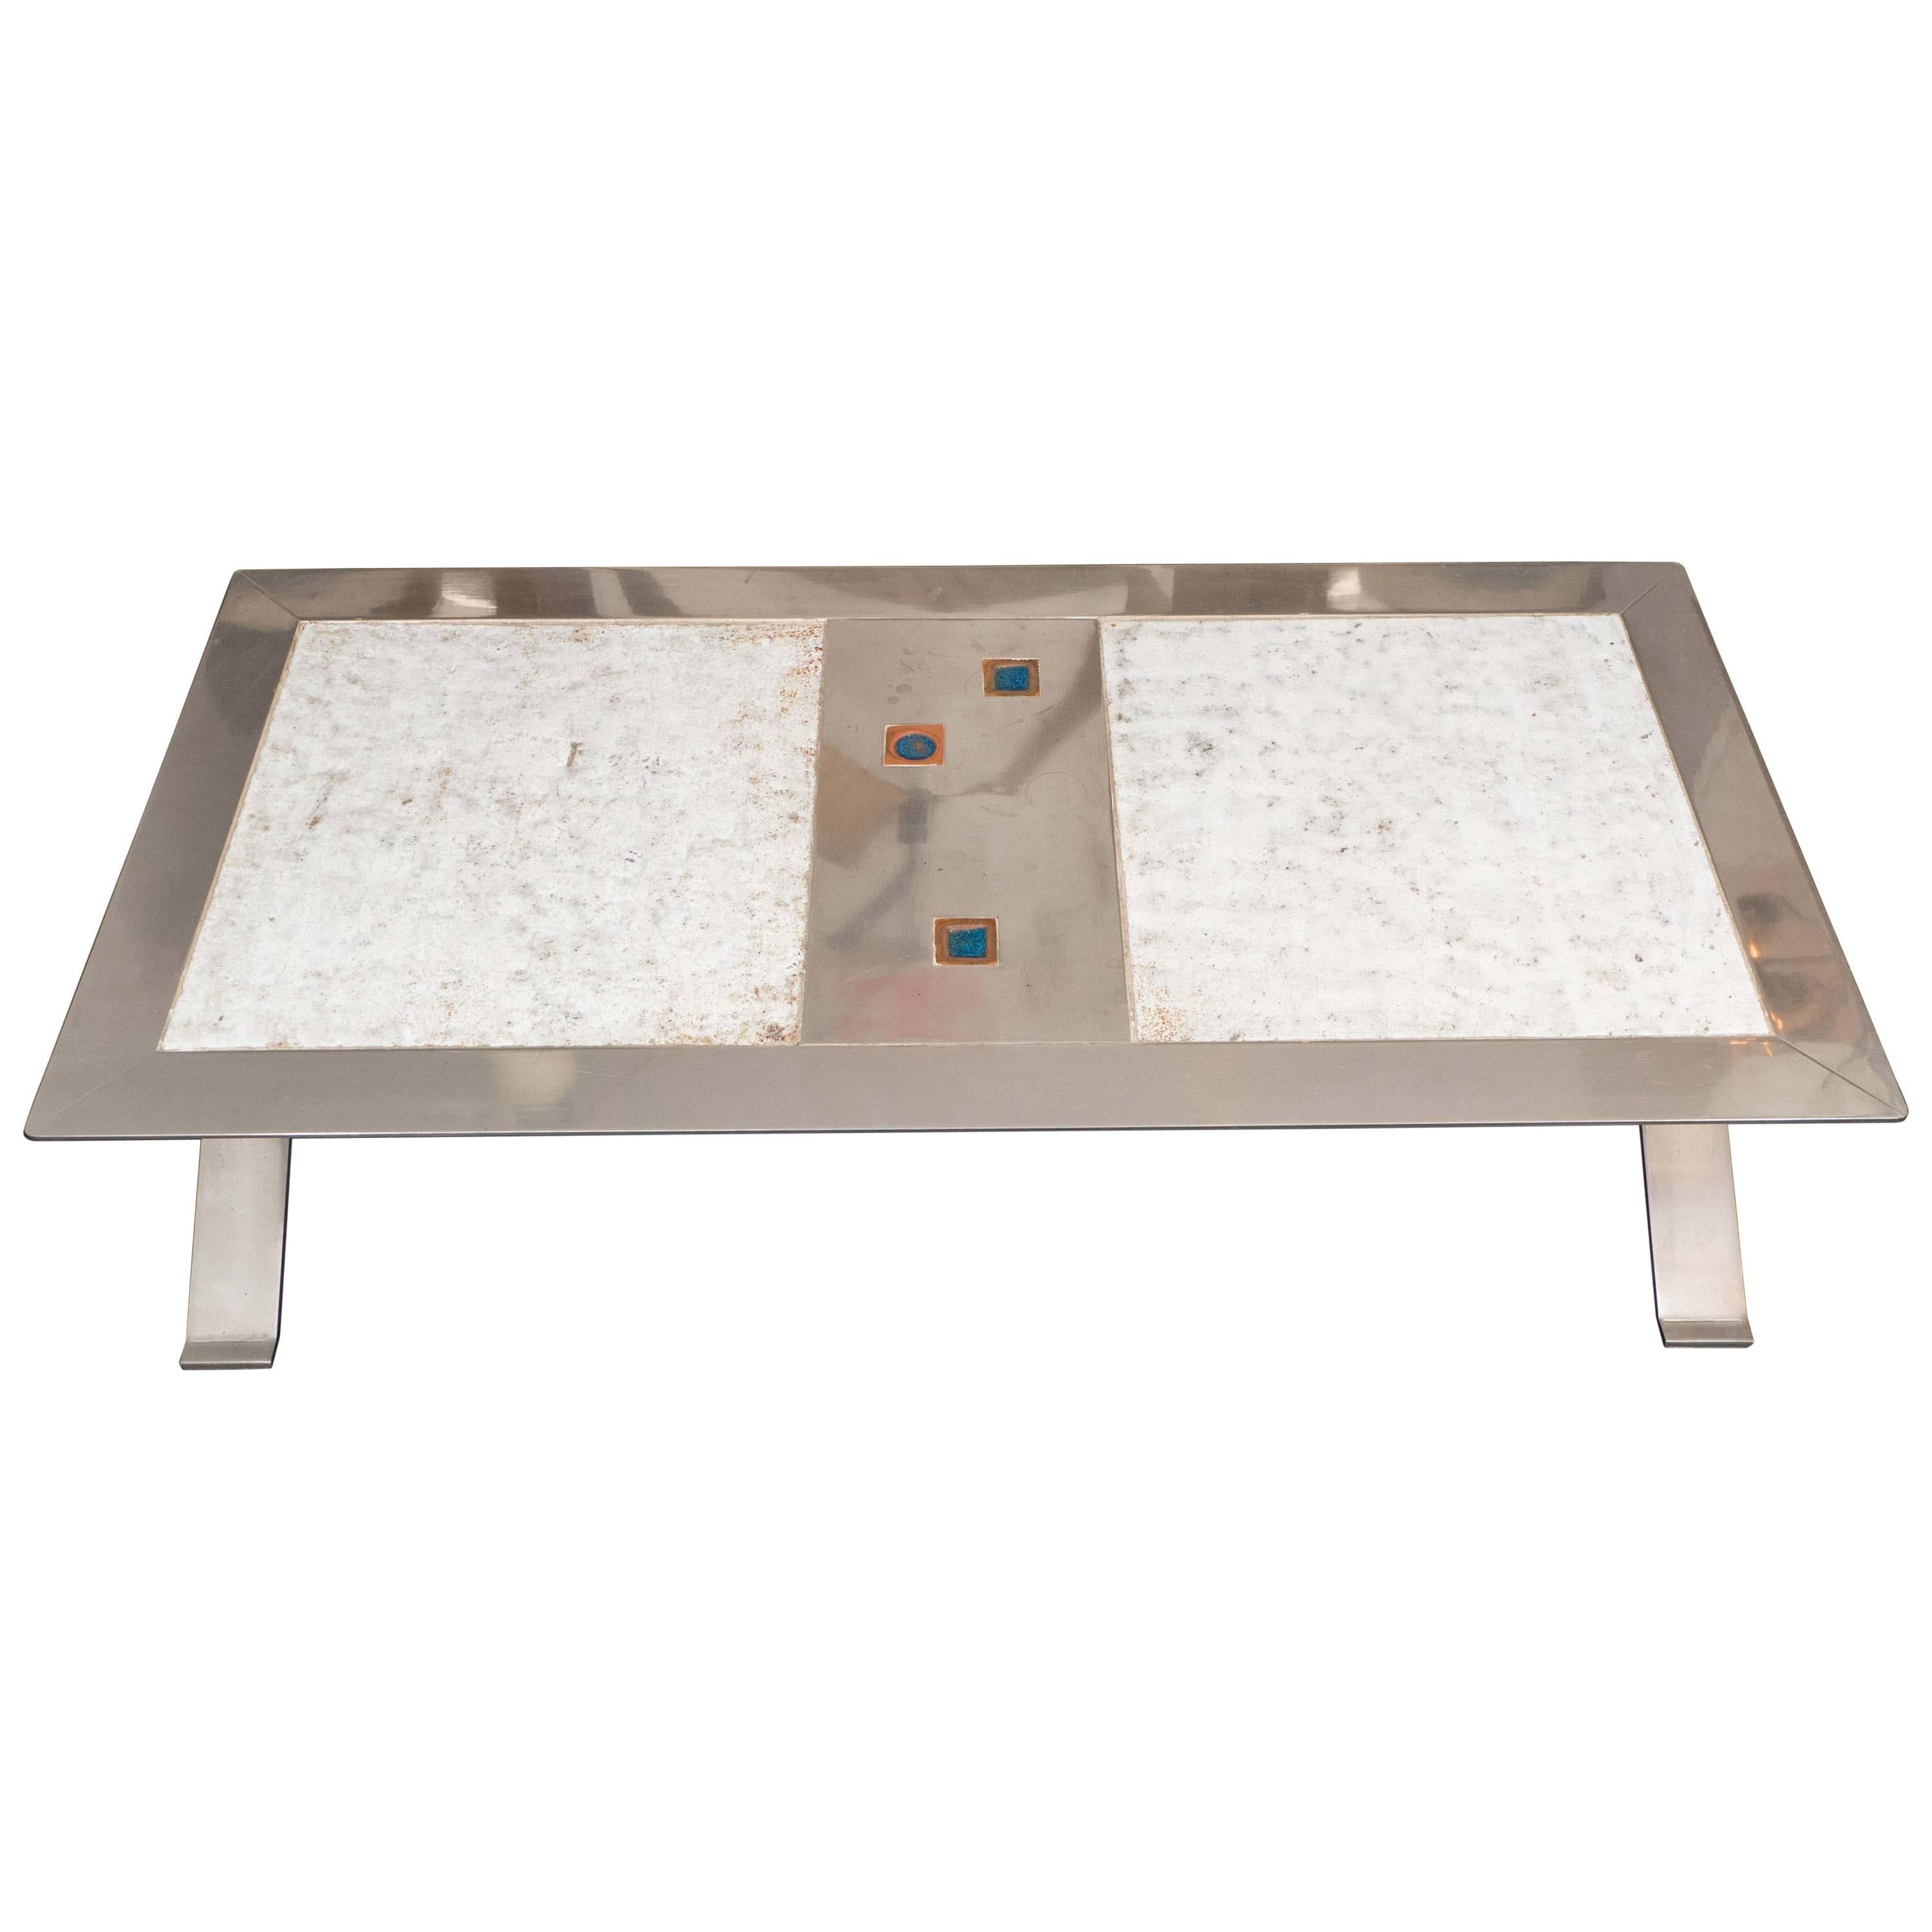 Stainless Steel and Ceramic Table